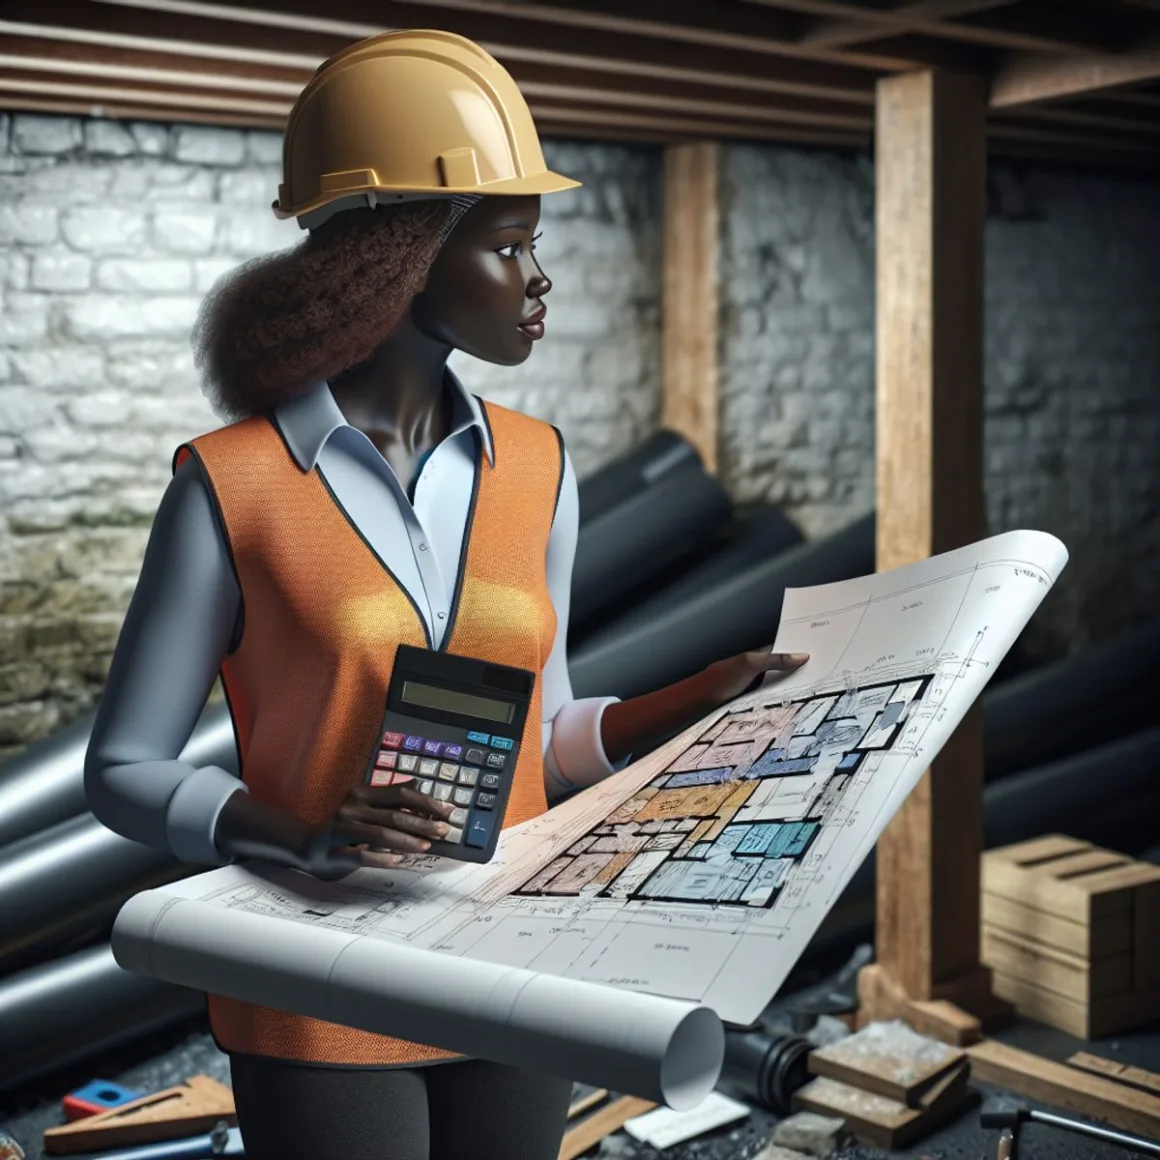 A construction worker attentively examining a blueprint while holding a calculator and wearing a yellow safety helmet and orange high-visibility vest, standing against a background with elements that hint at a basement under renovation.